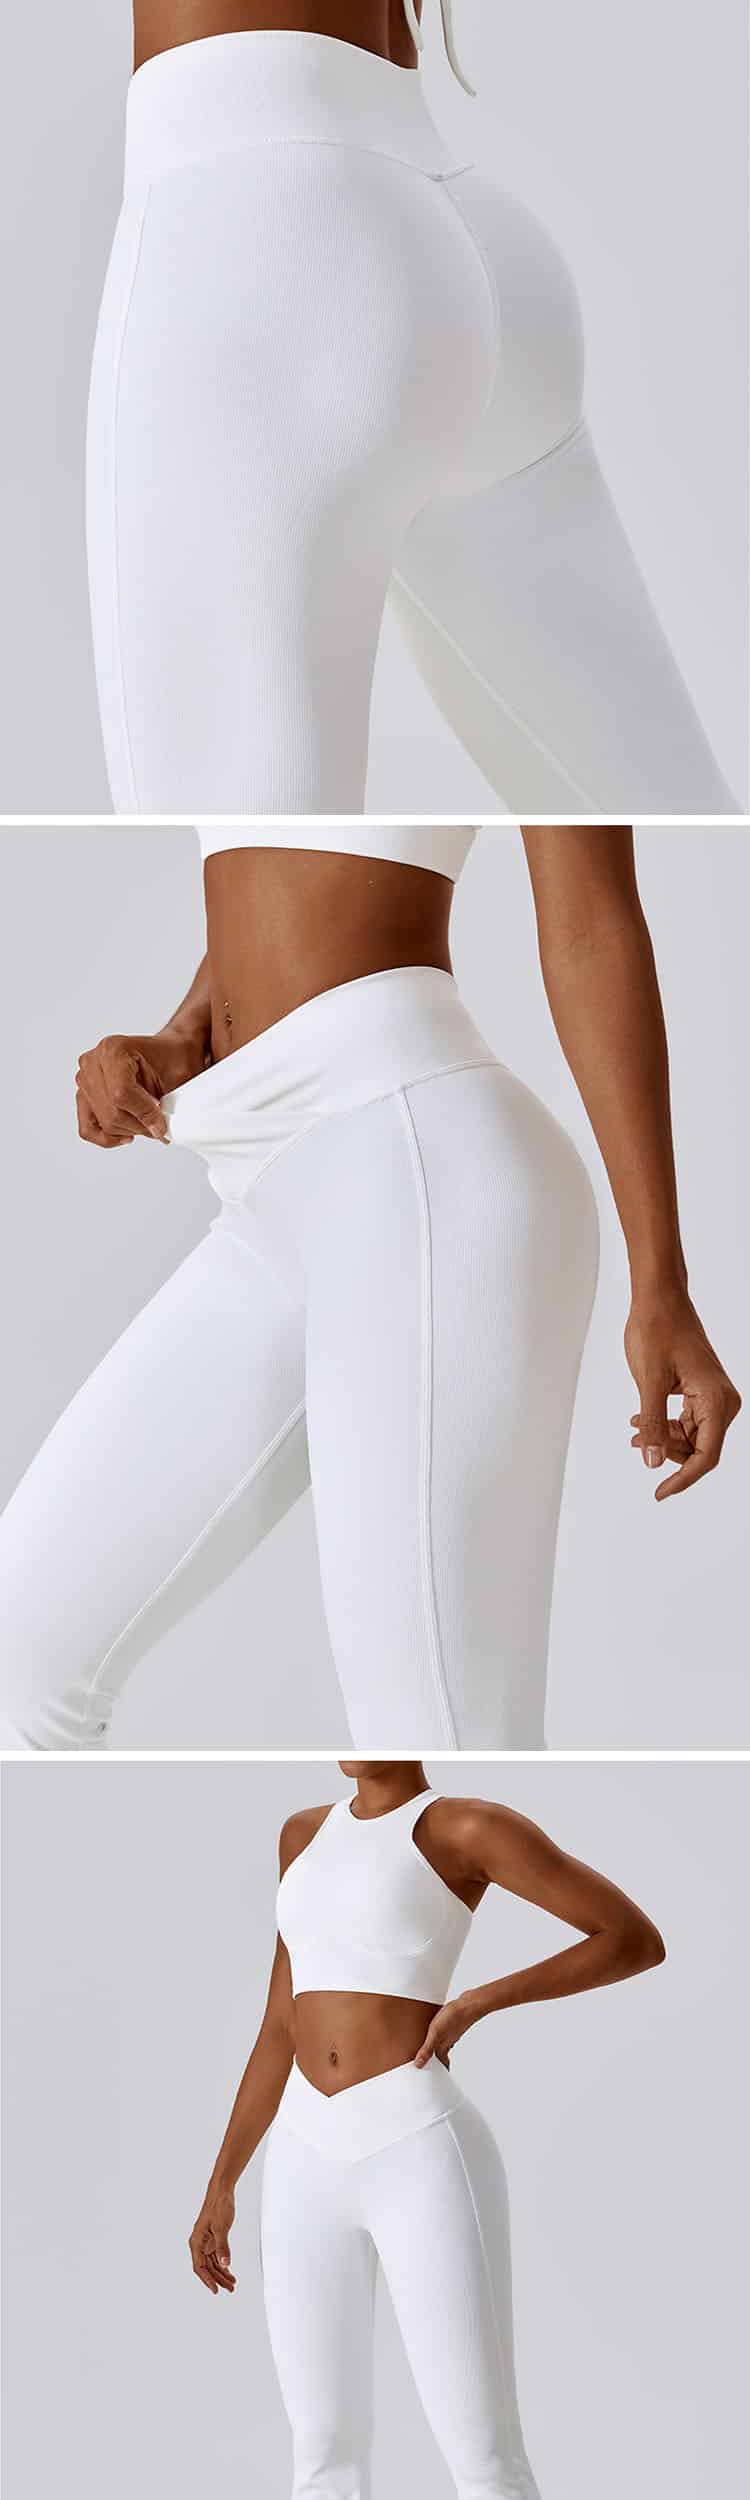 Adopt hip-lifting design to show sexy hips and highlight sexy figure